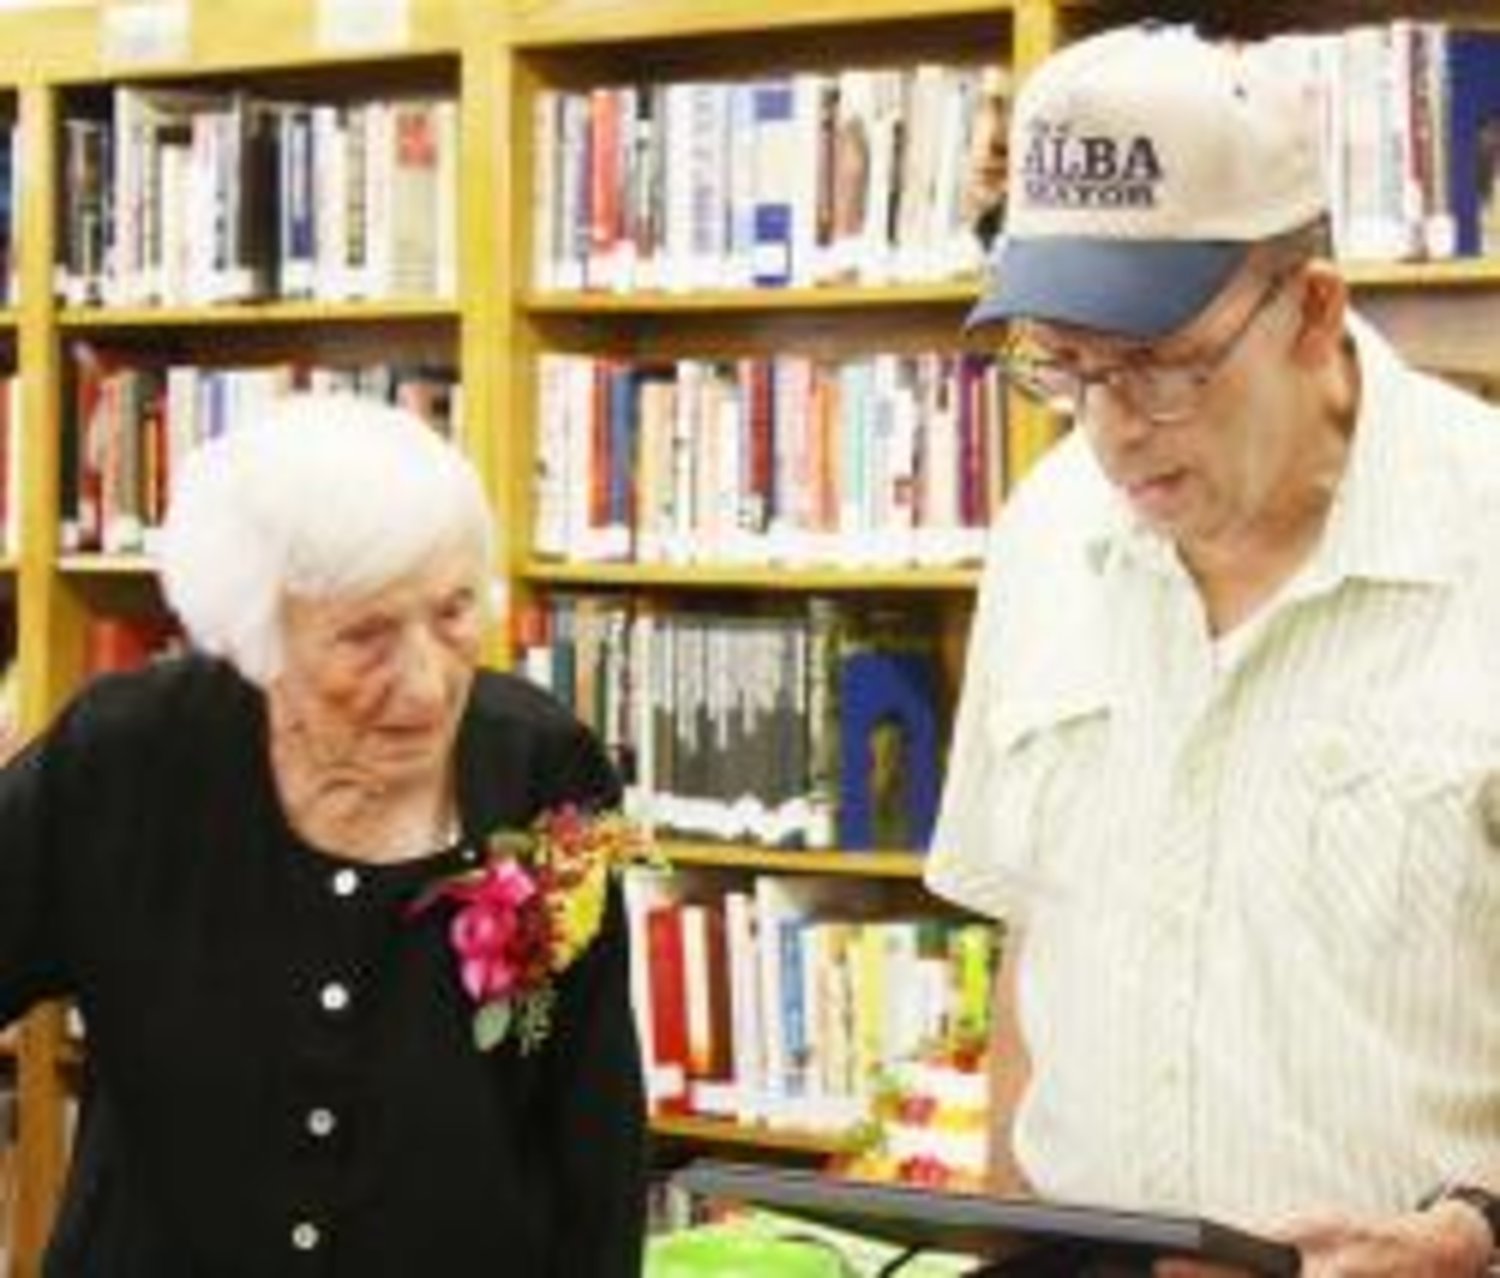 Hazel Panter of Alba receives a proclamation from Alba Mayor Orvin Carroll, who designated Aug. 29 as Hazel Panter Day in honor of her 100th birthday. Carroll said this was the first time he had ever issued a proclamation. A group of Panter's family, friends and other acquaintances gathered to celebrate the day at the Alba Public Library in the morning of Aug. 29.